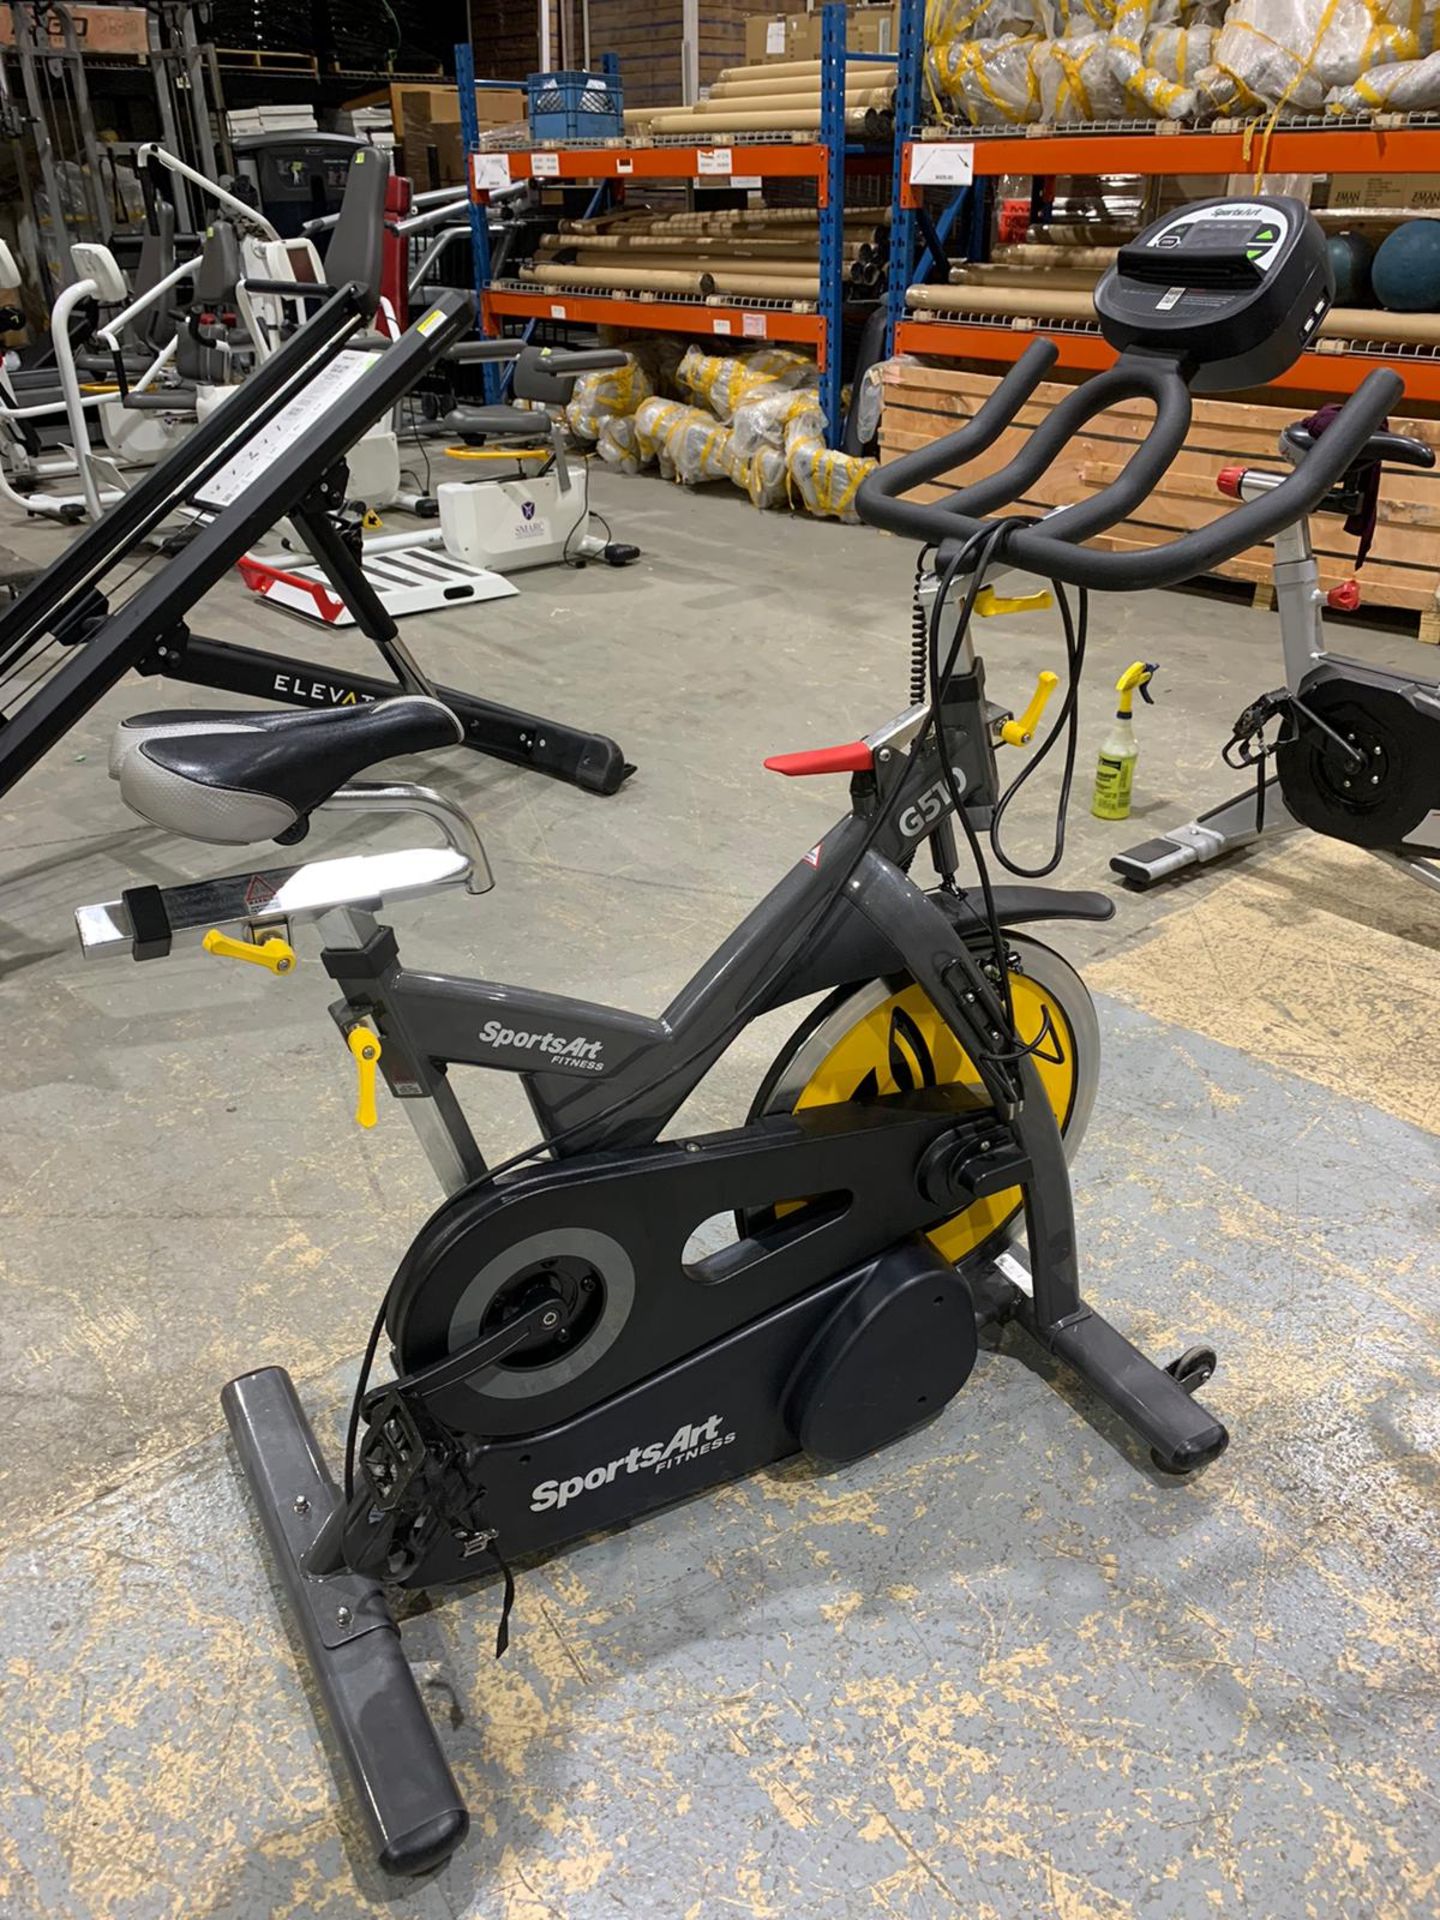 SPORTSART G510 INDOOR CYCLE MACHINE - Image 2 of 4